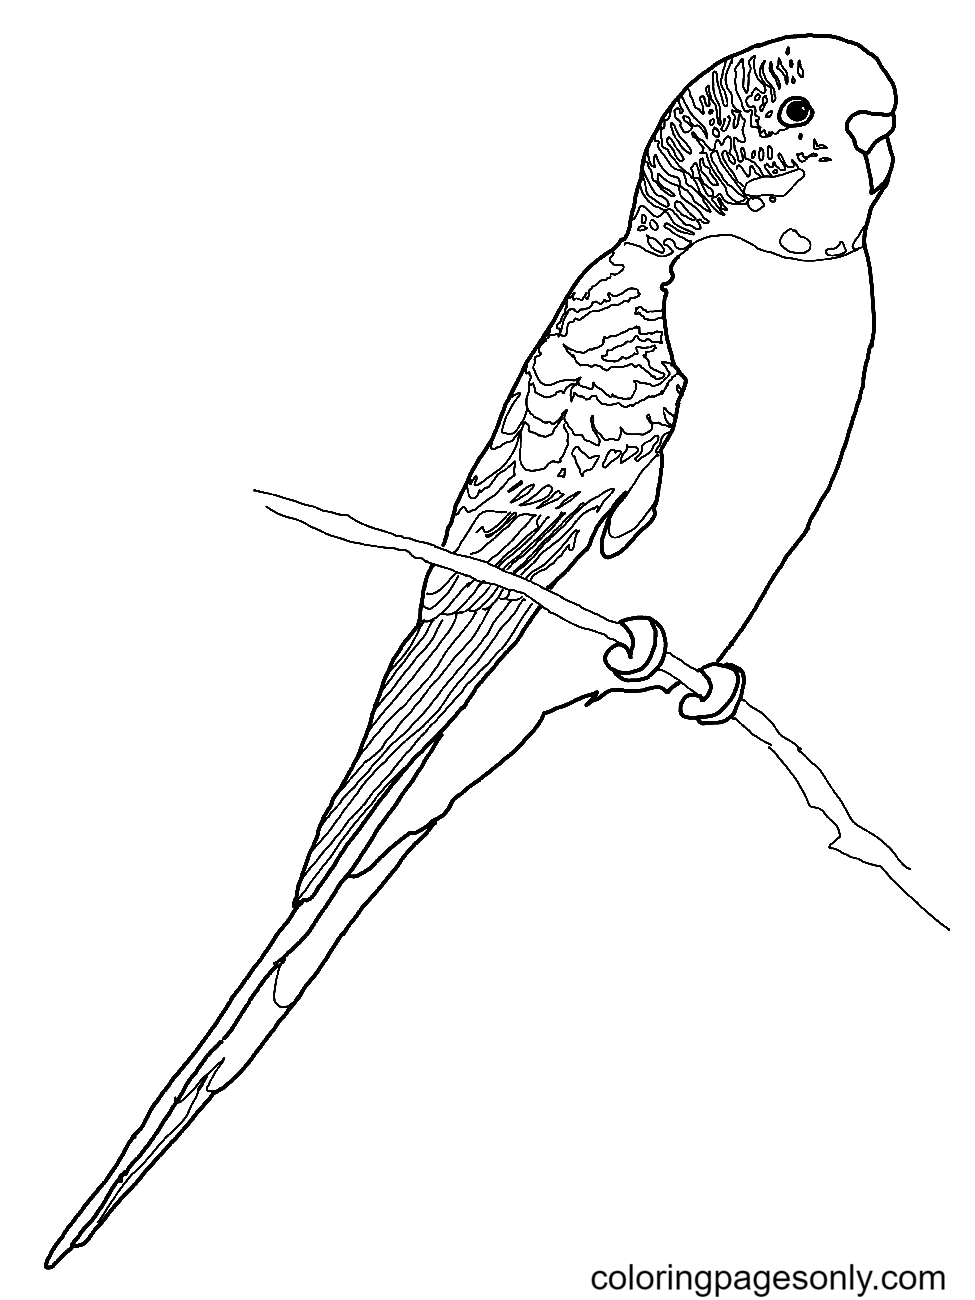 Budgerigar Parrot Coloring Page